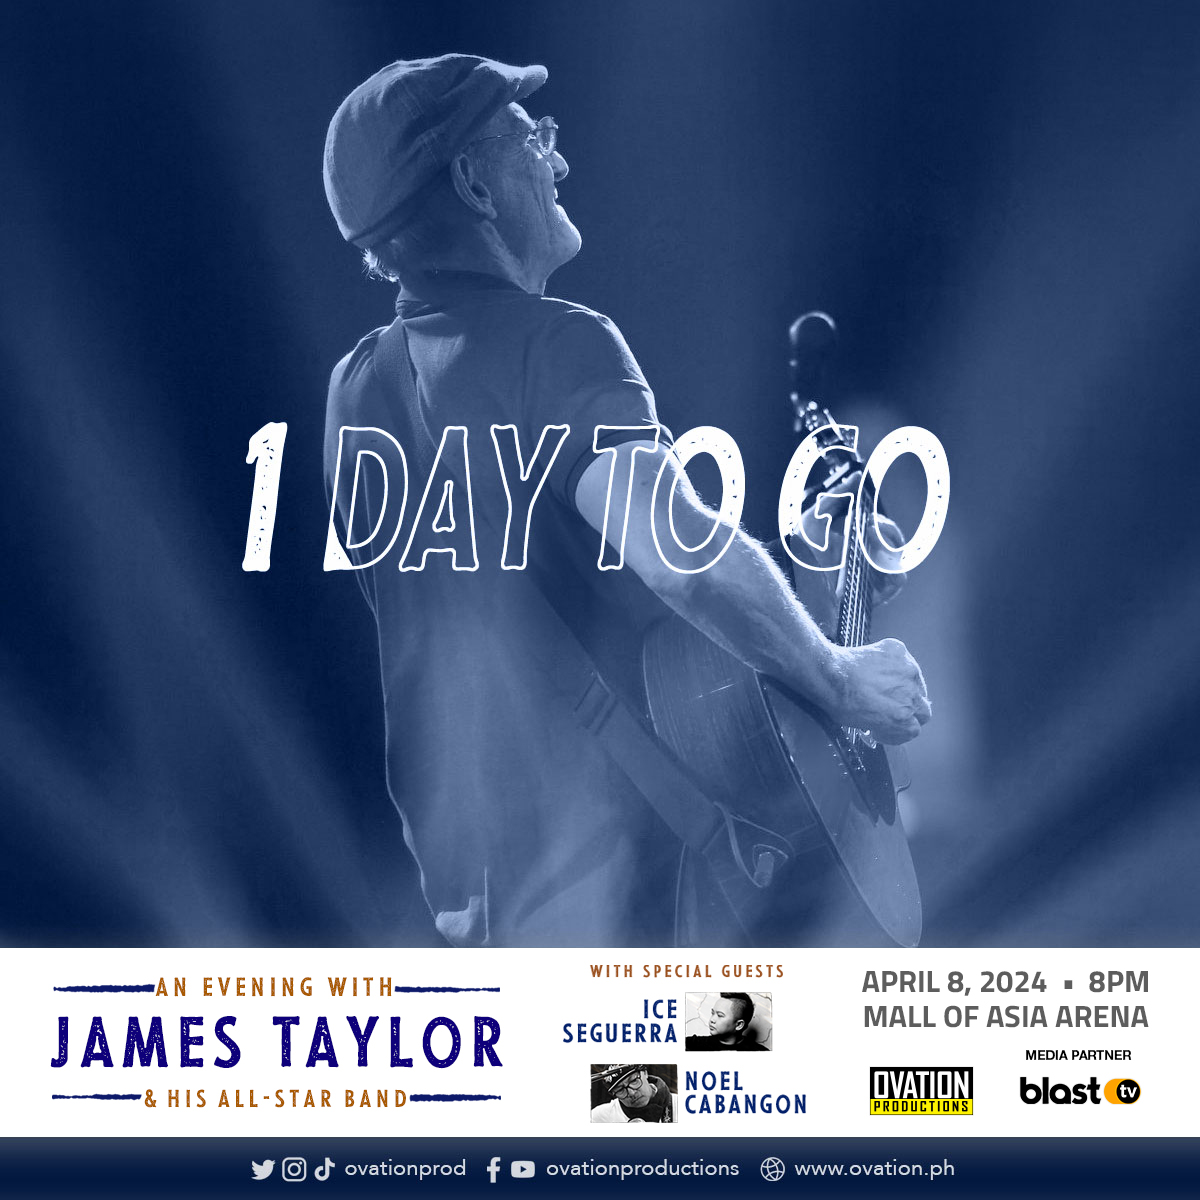 We only have 1 day to go before James Taylor's concert at the Mall of Asia Arena! What are you waiting for? You still have a chance to get your tickets at smtickets.com!